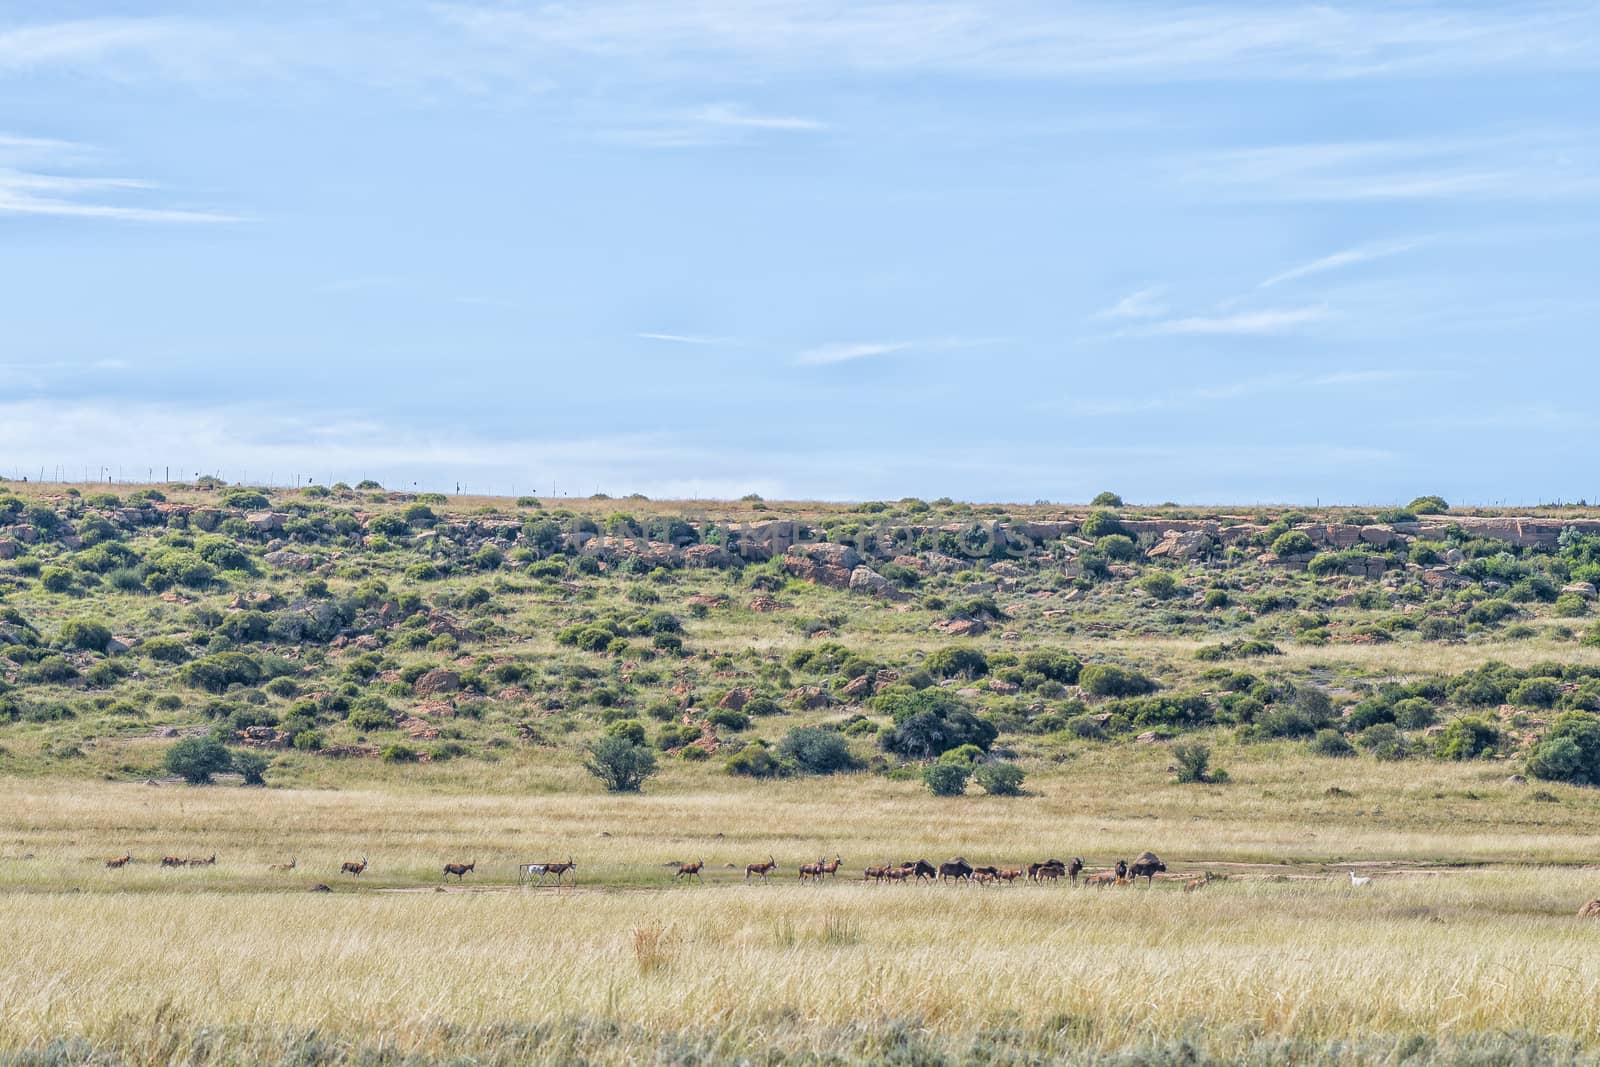 Herds of black wildebeest and red hartebeest on the Eland Hiking Trail at Eingedi near Ladybrand. White hartebeest are visible